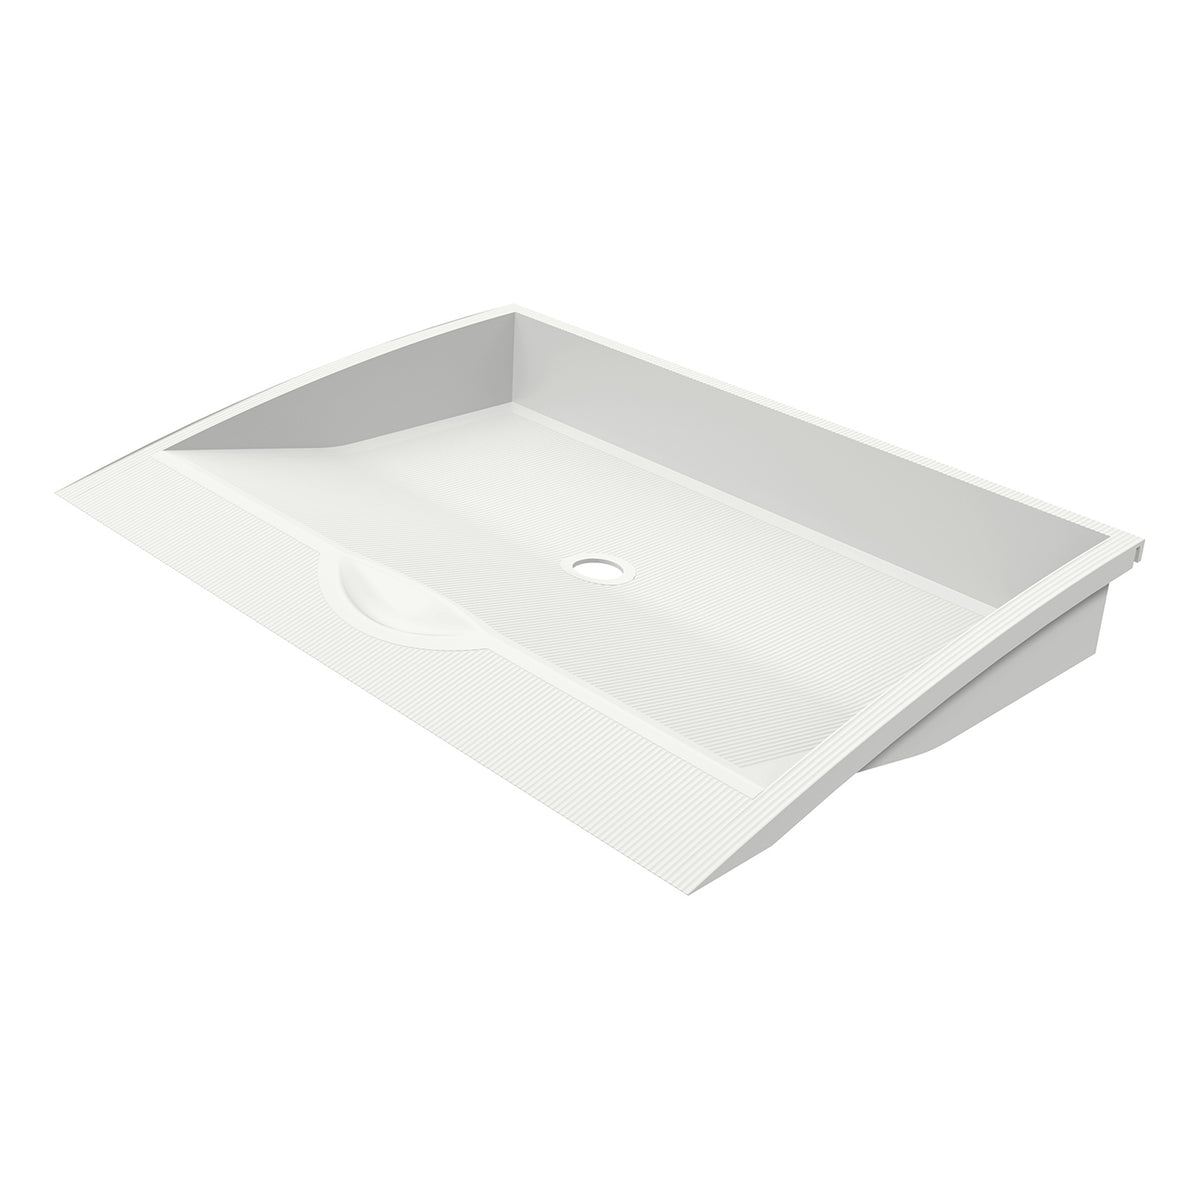 Viewmate A4 tray - option 190